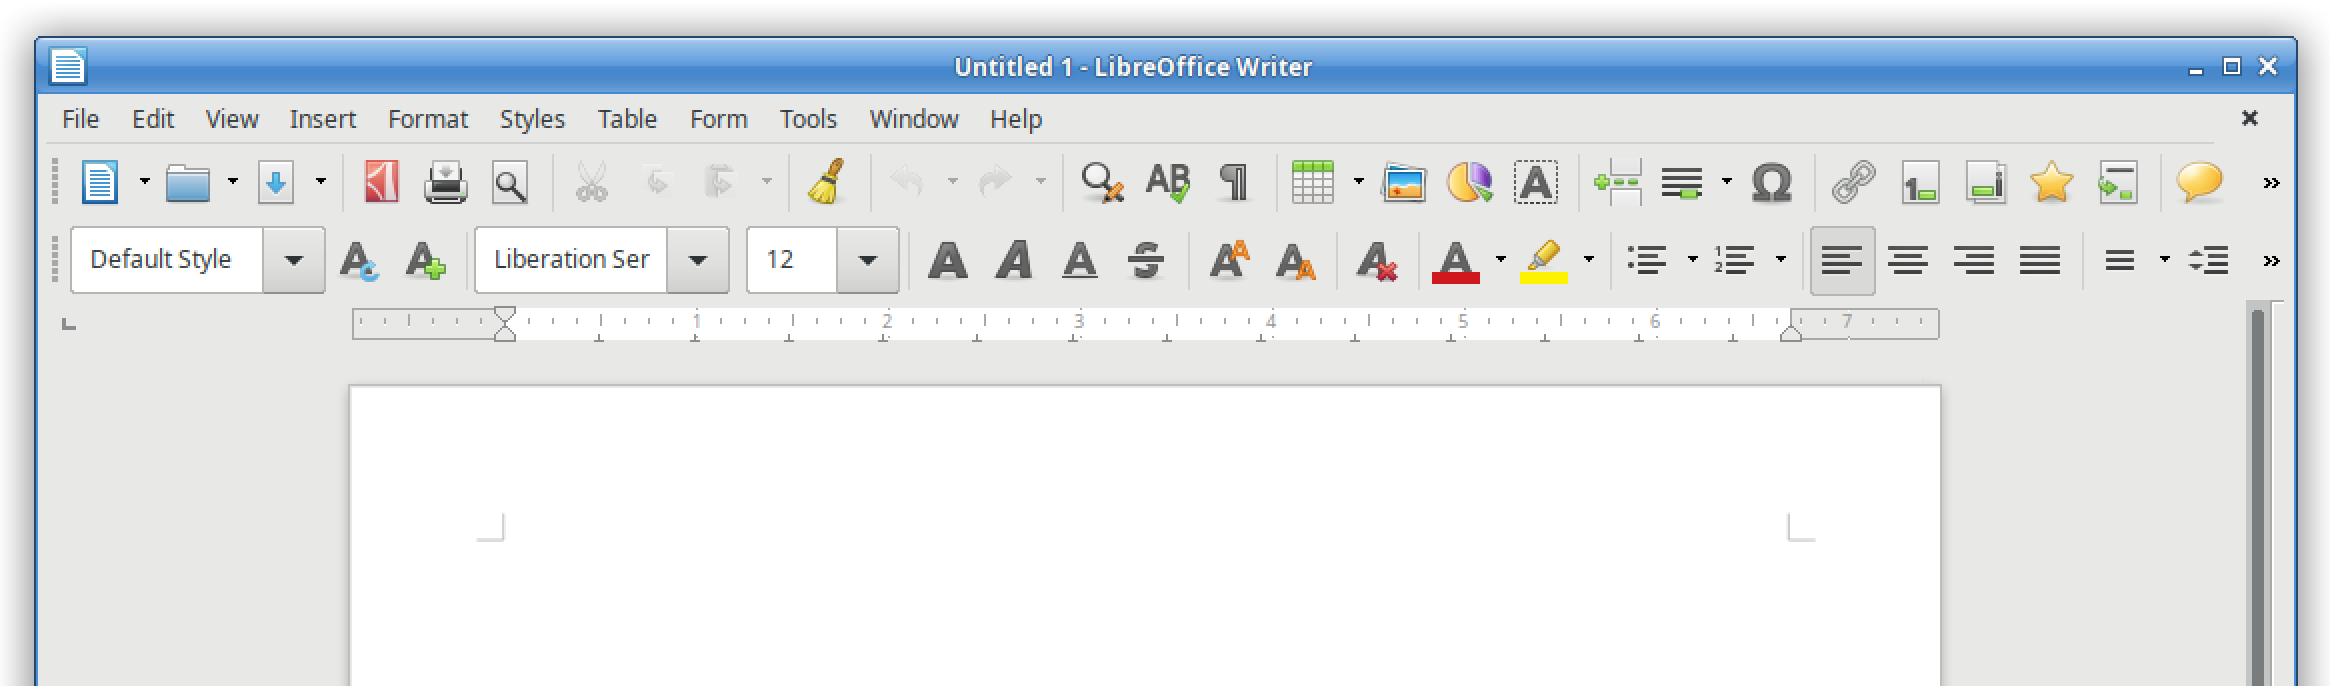 Image result for libreoffice